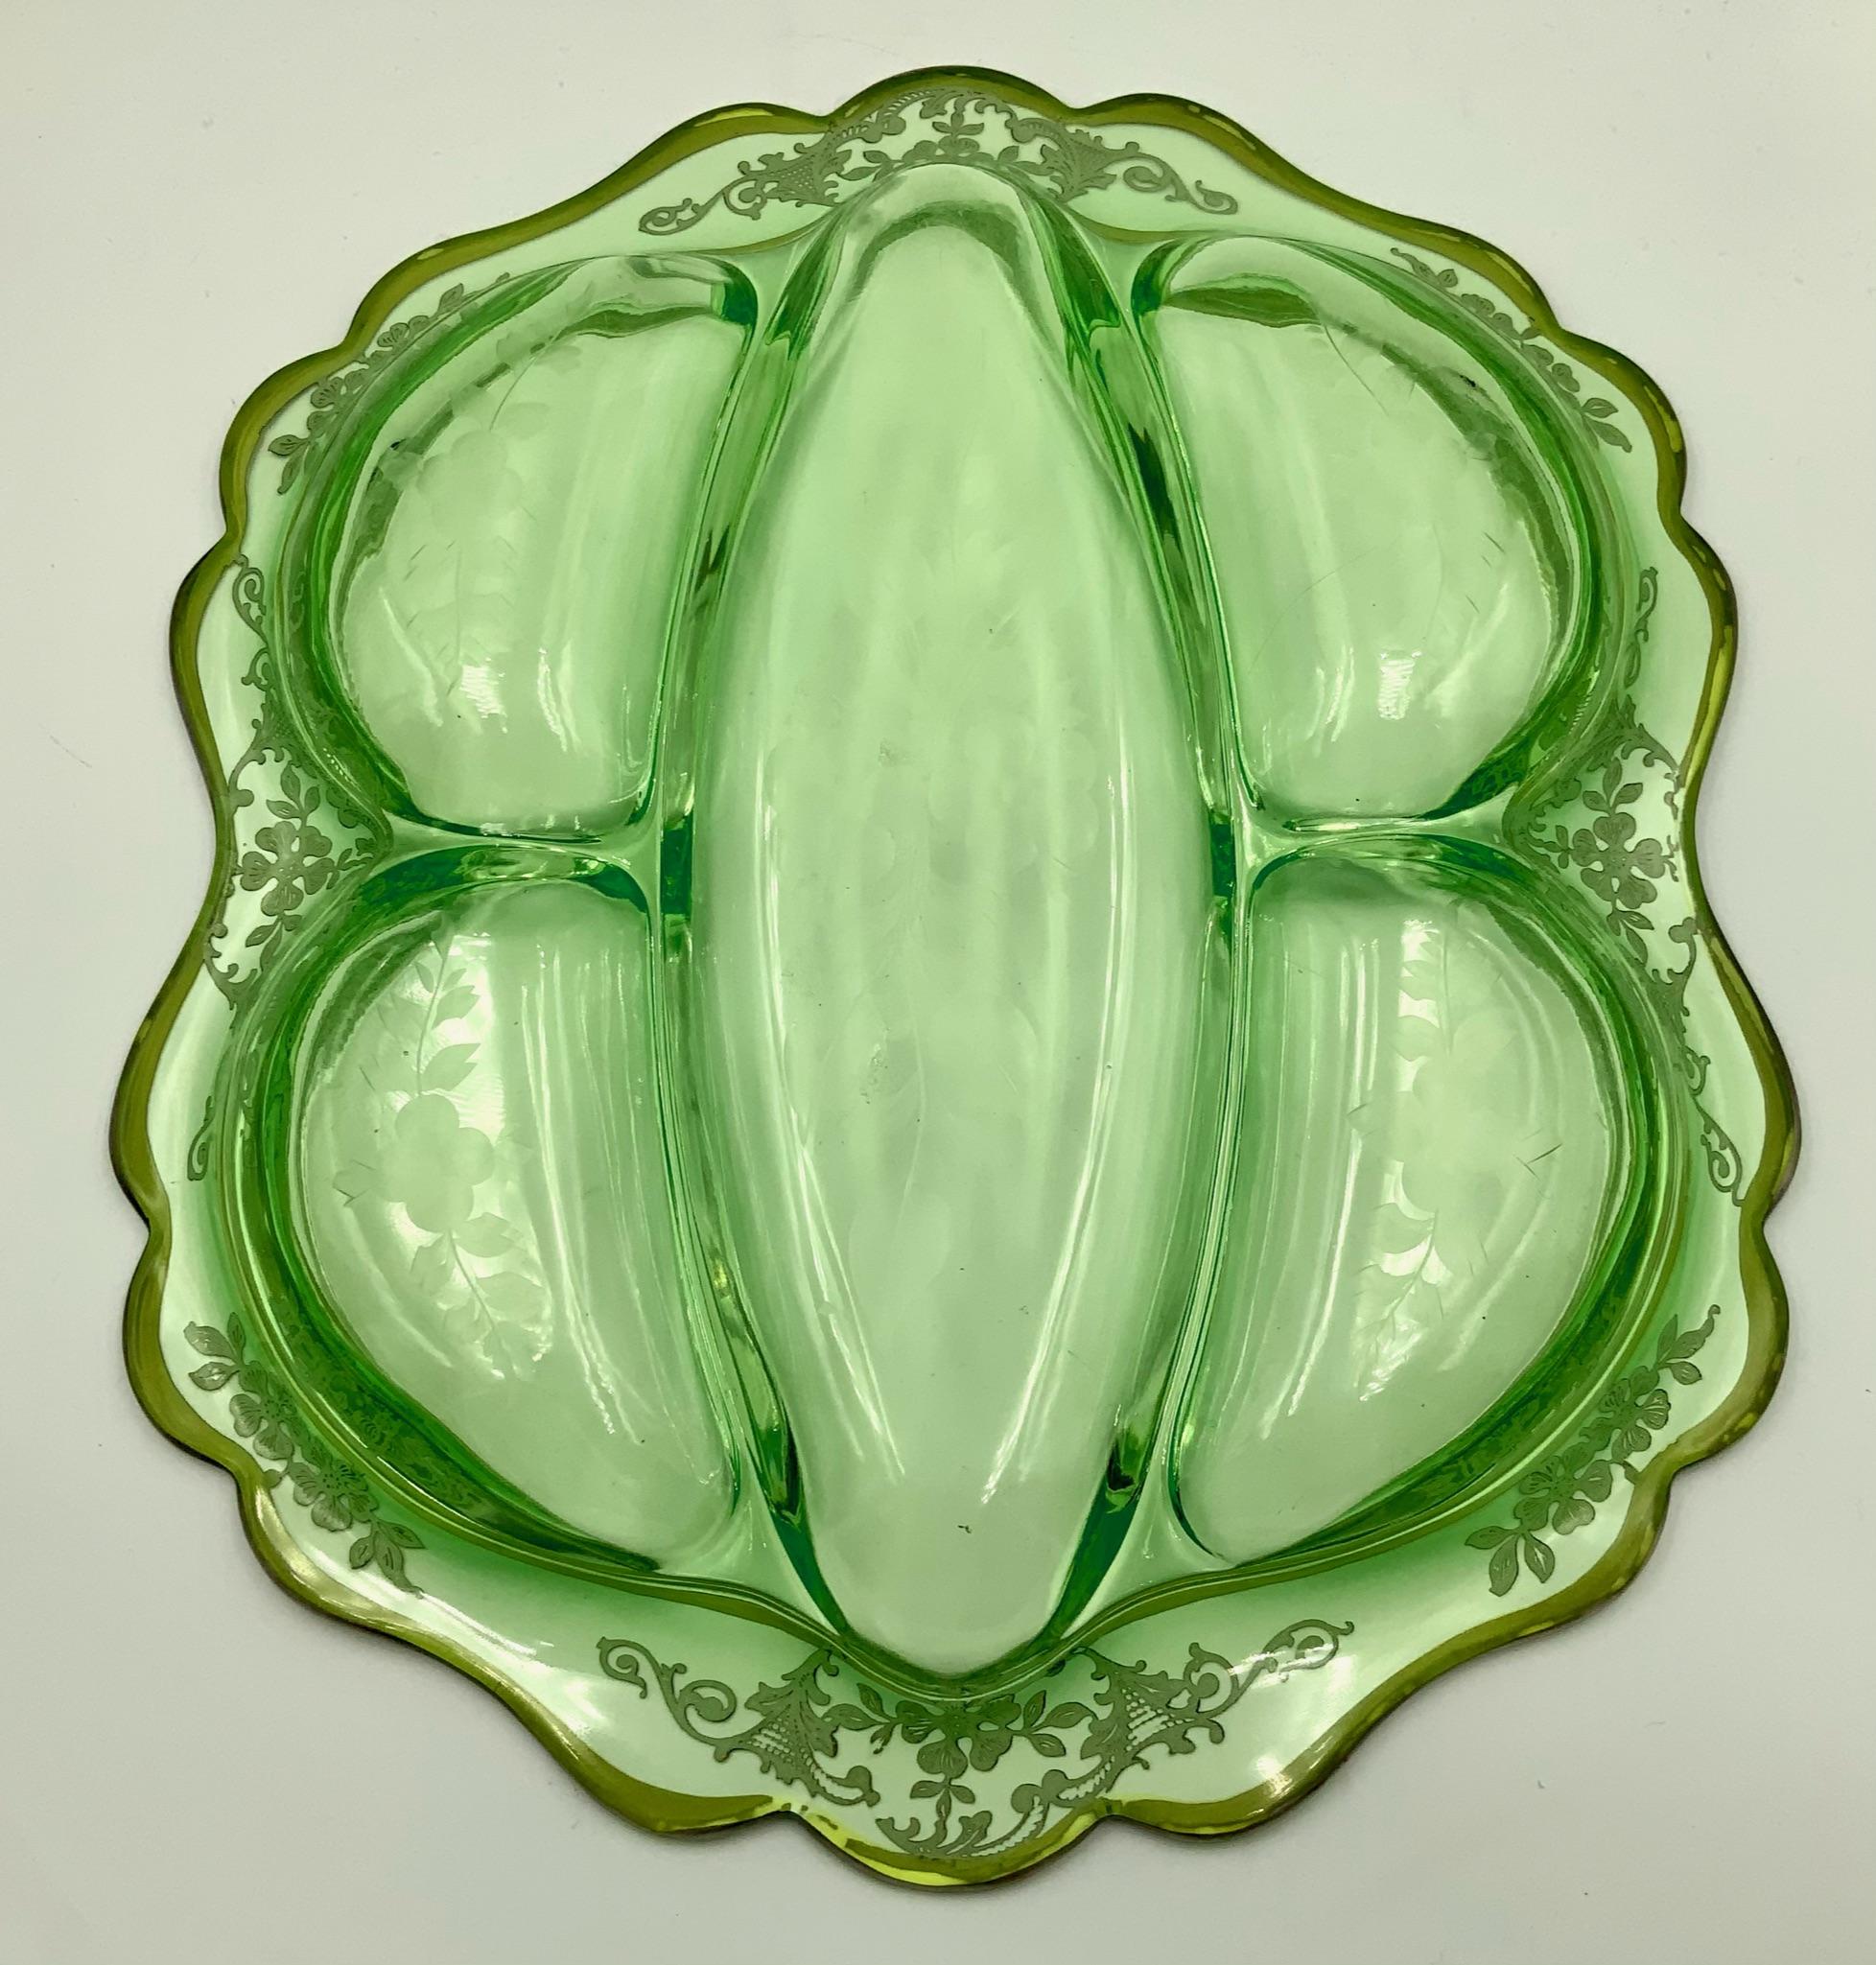 Wonderful large green depression glass 5 - part oblong celery / relish dish with etched floral and silver overlay design. I believe this piece is #3400 made by Cambridge Glass Co. between 1930's- 1950's that was then decorated with an etched floral